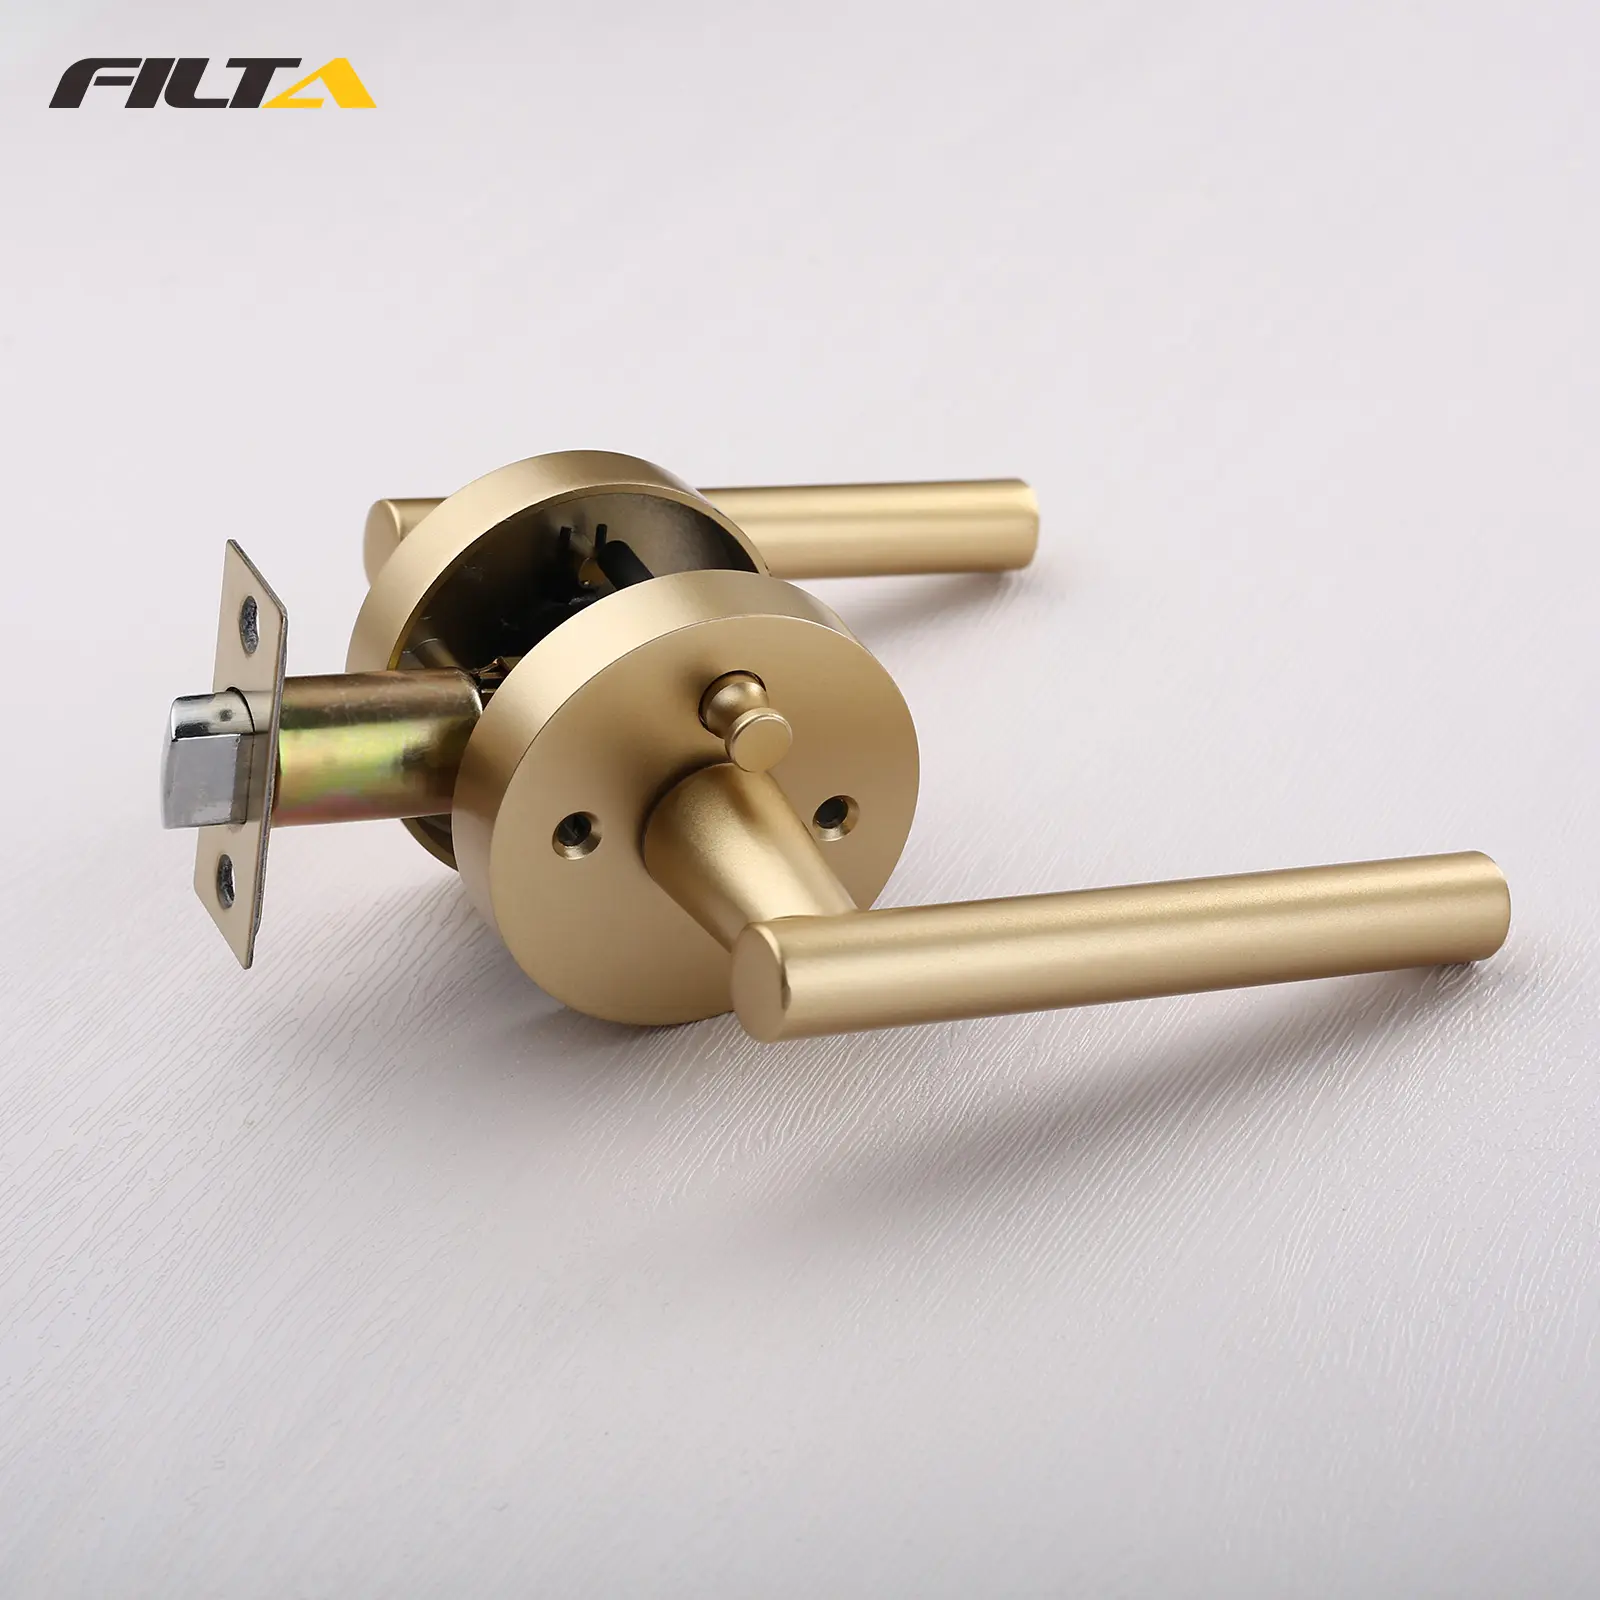 Luxurious Modern Black and Brass Privacy Passage Door Lock Handle for American Homes